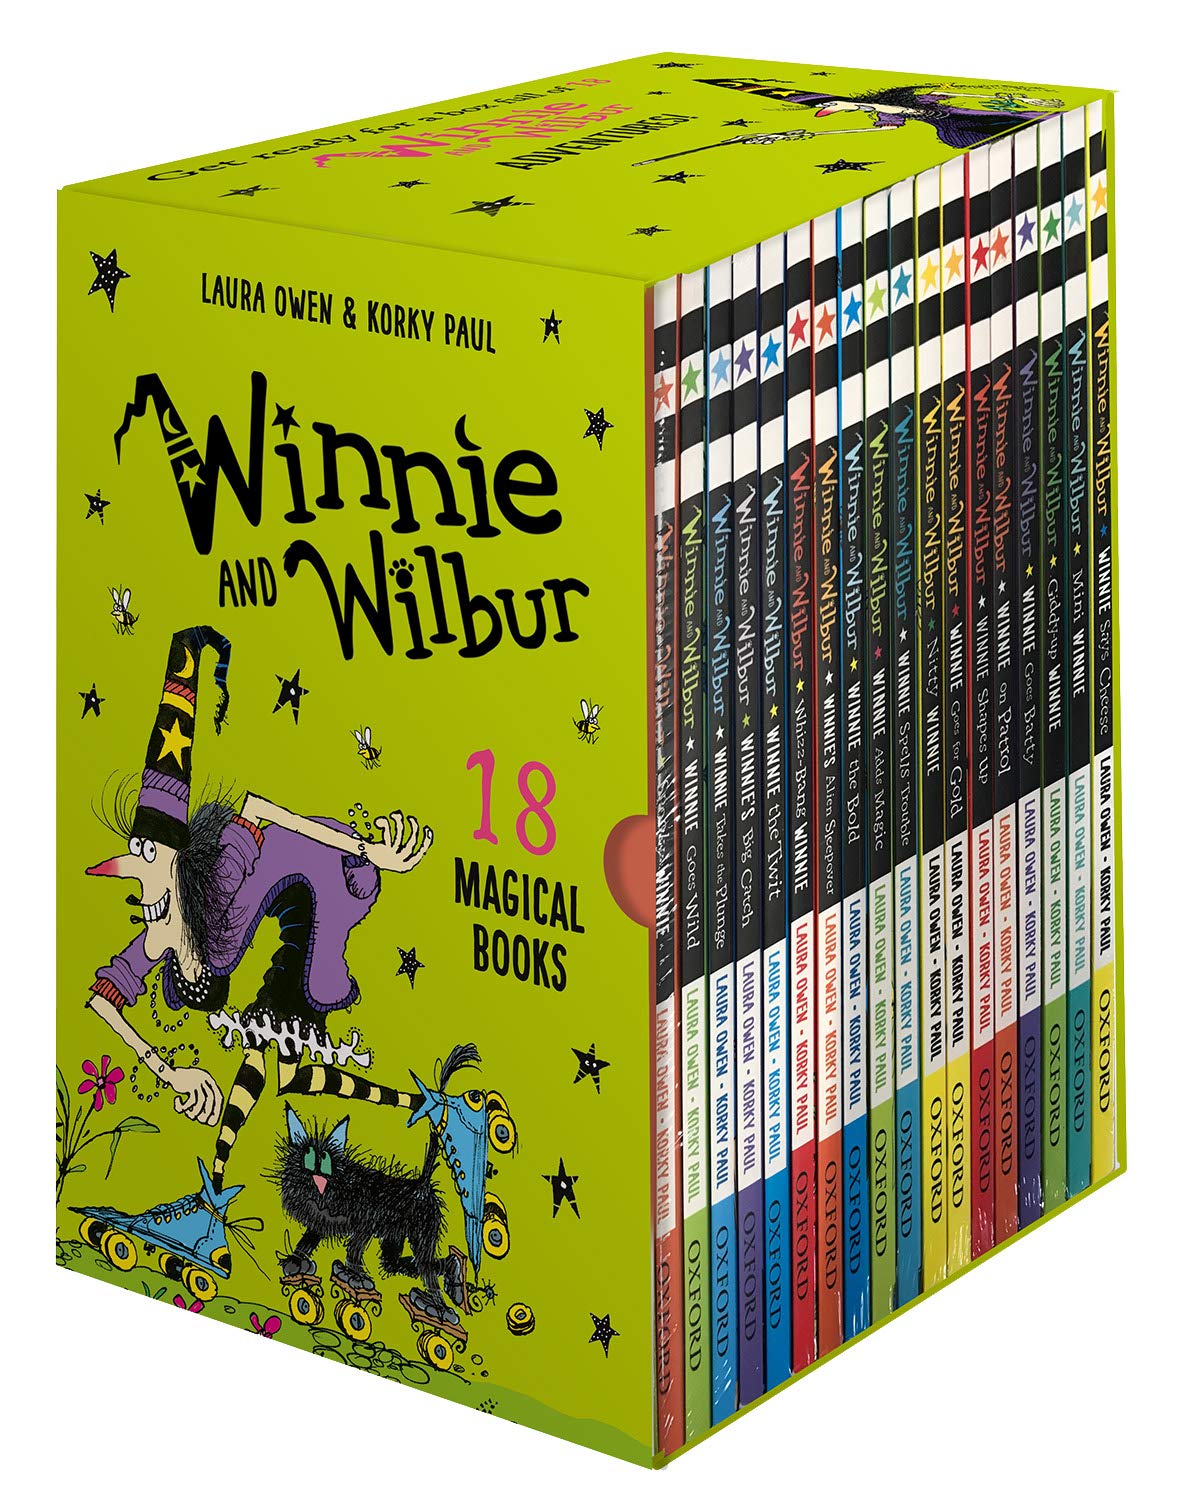 Winnie and Wilbur 18 Magical Fiction Books Collection Box Set Paperback - Lets Buy Books